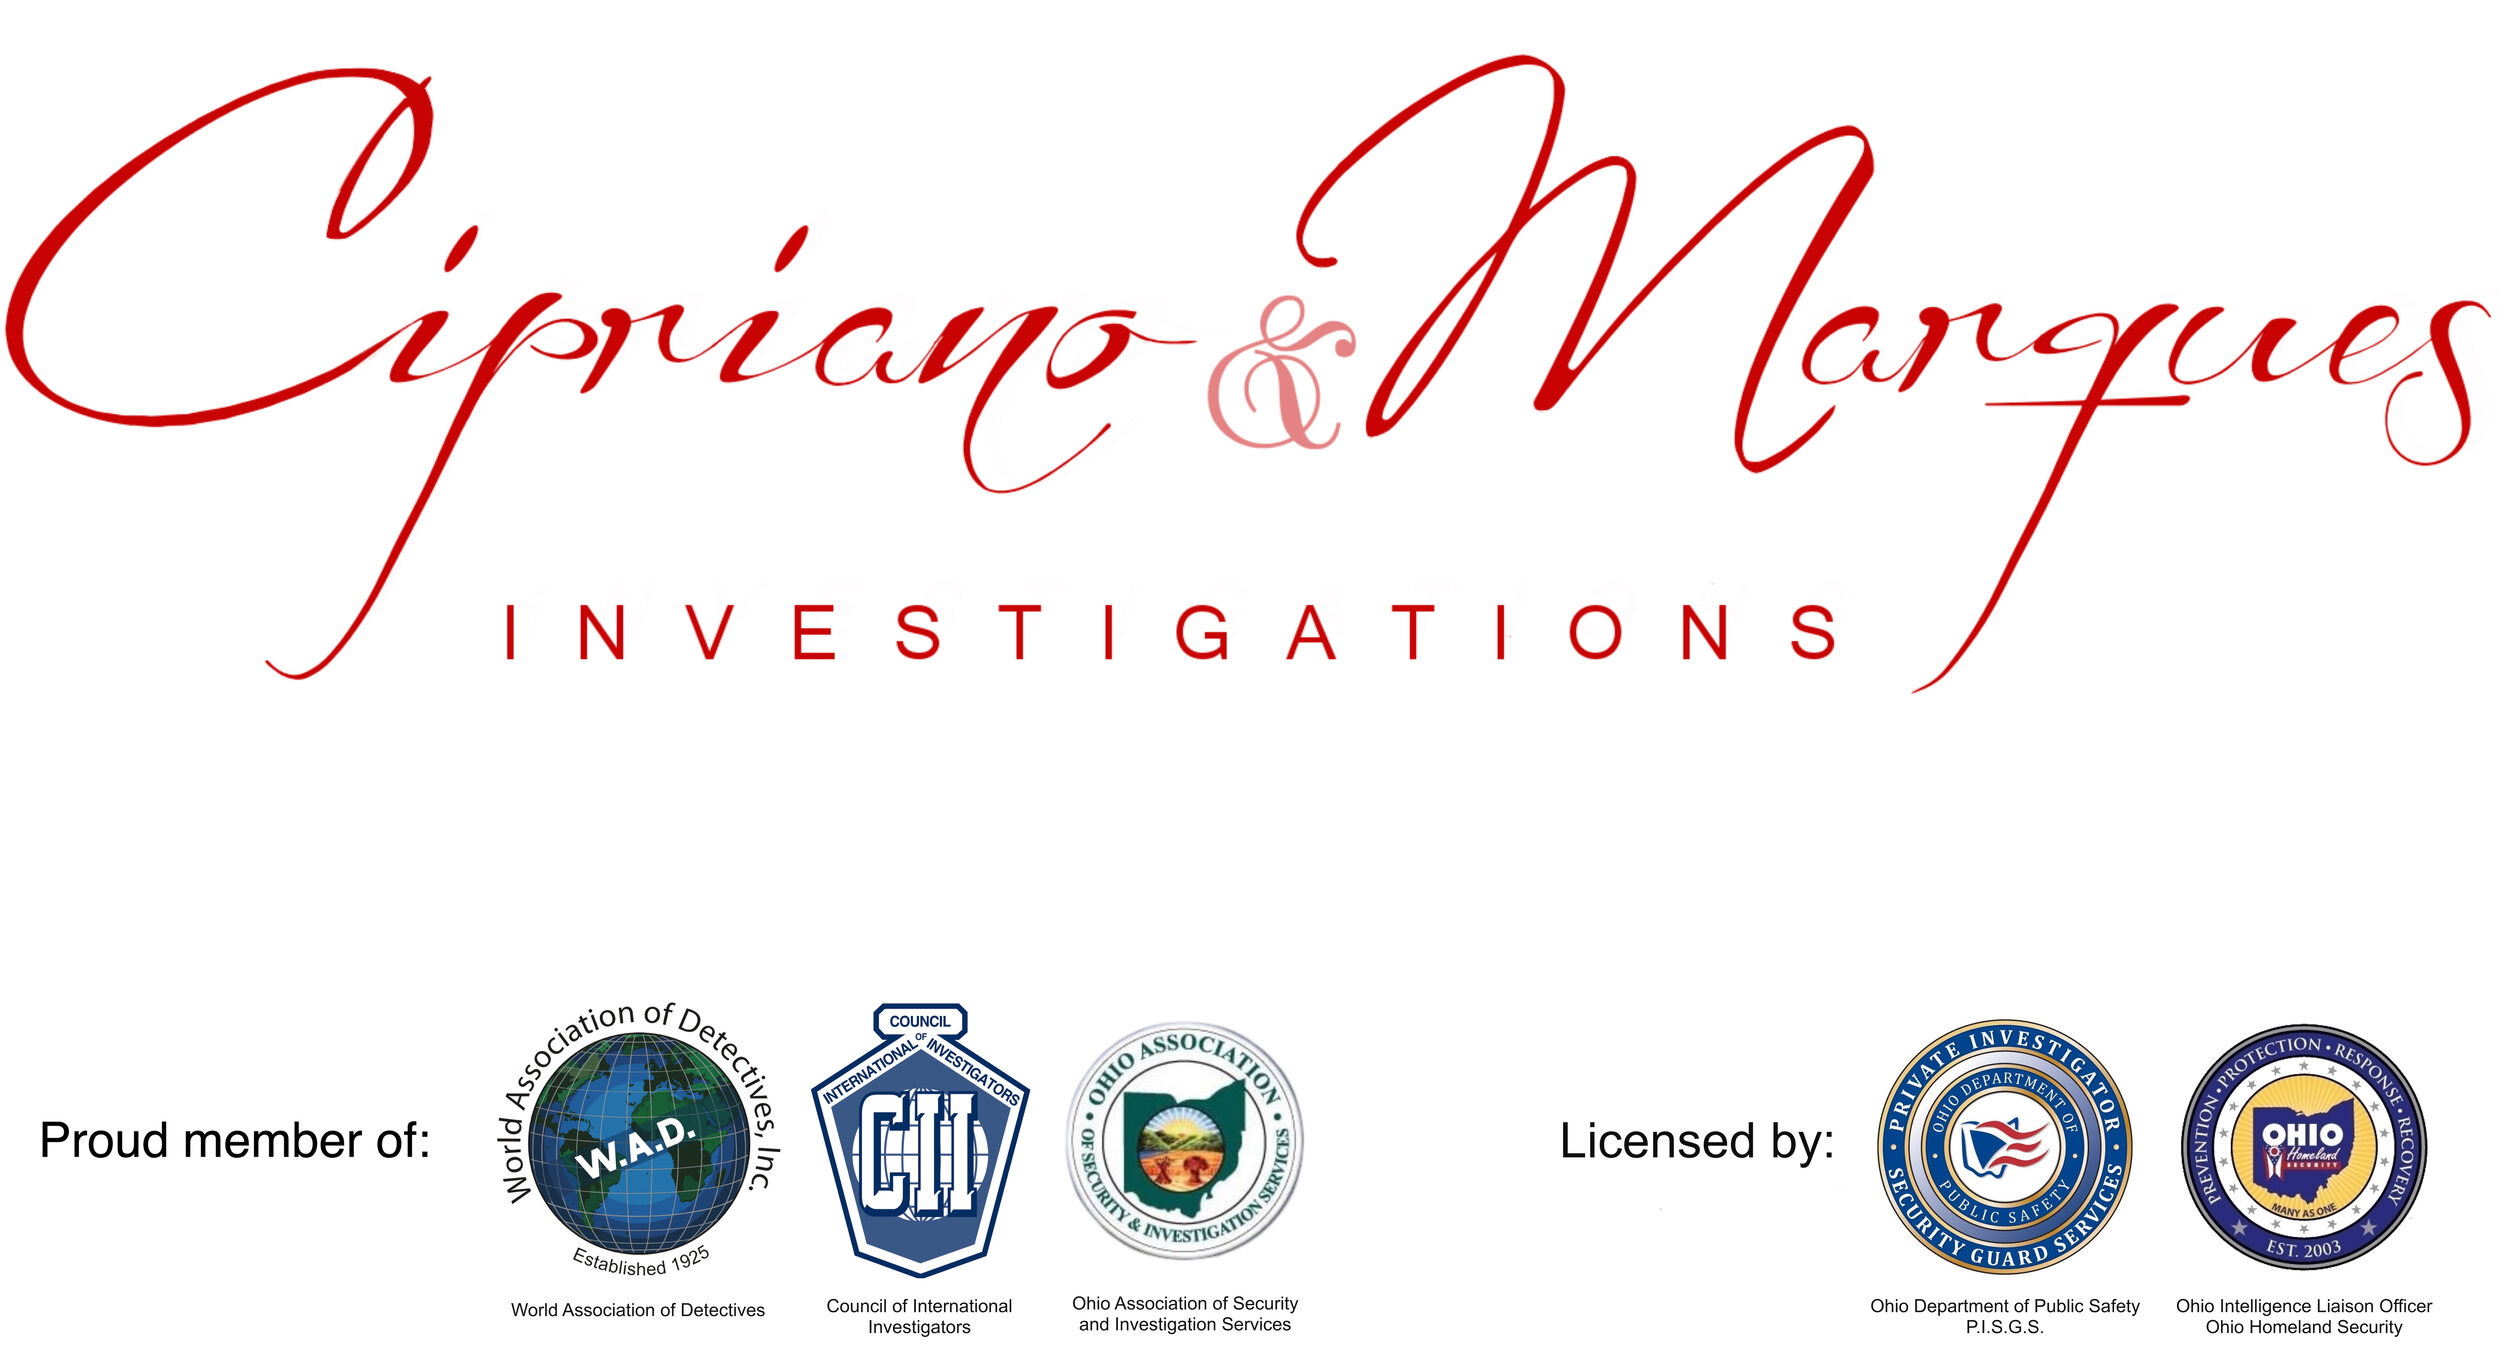 Process Service, Security, Protection, Private Investigations